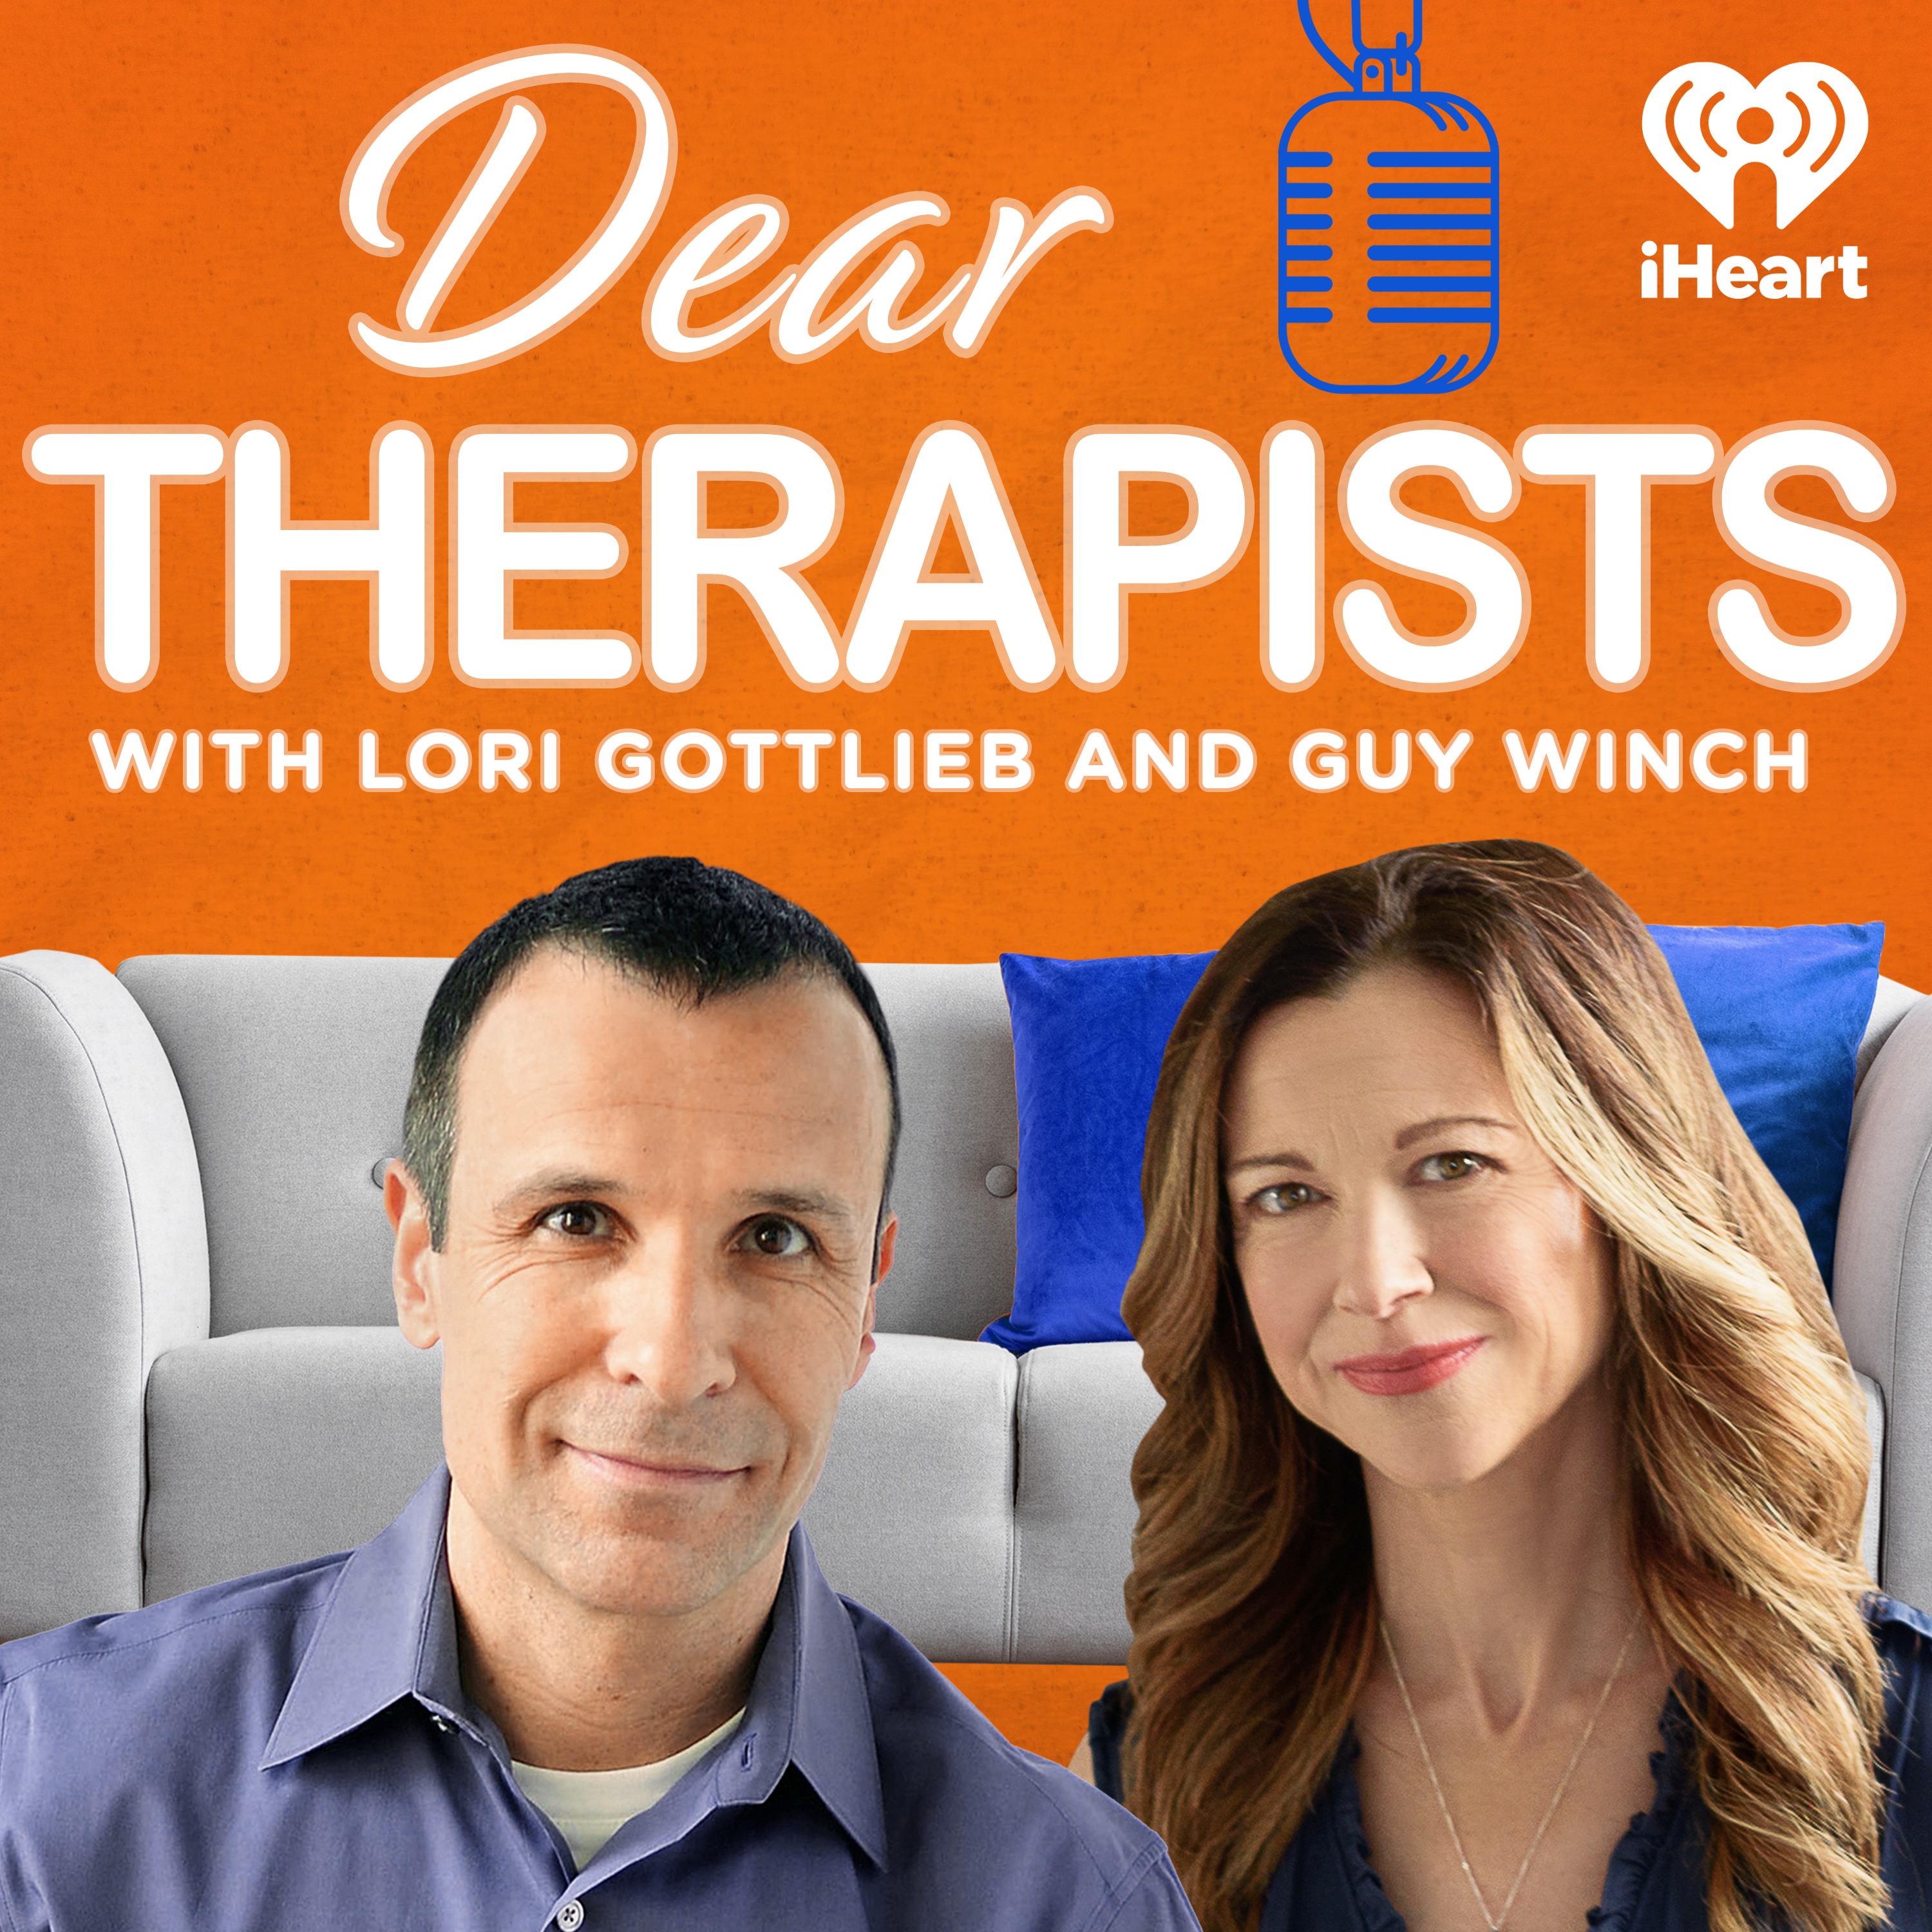 DEAR THERAPISTS Podcast returns next Tuesday, 7/20!